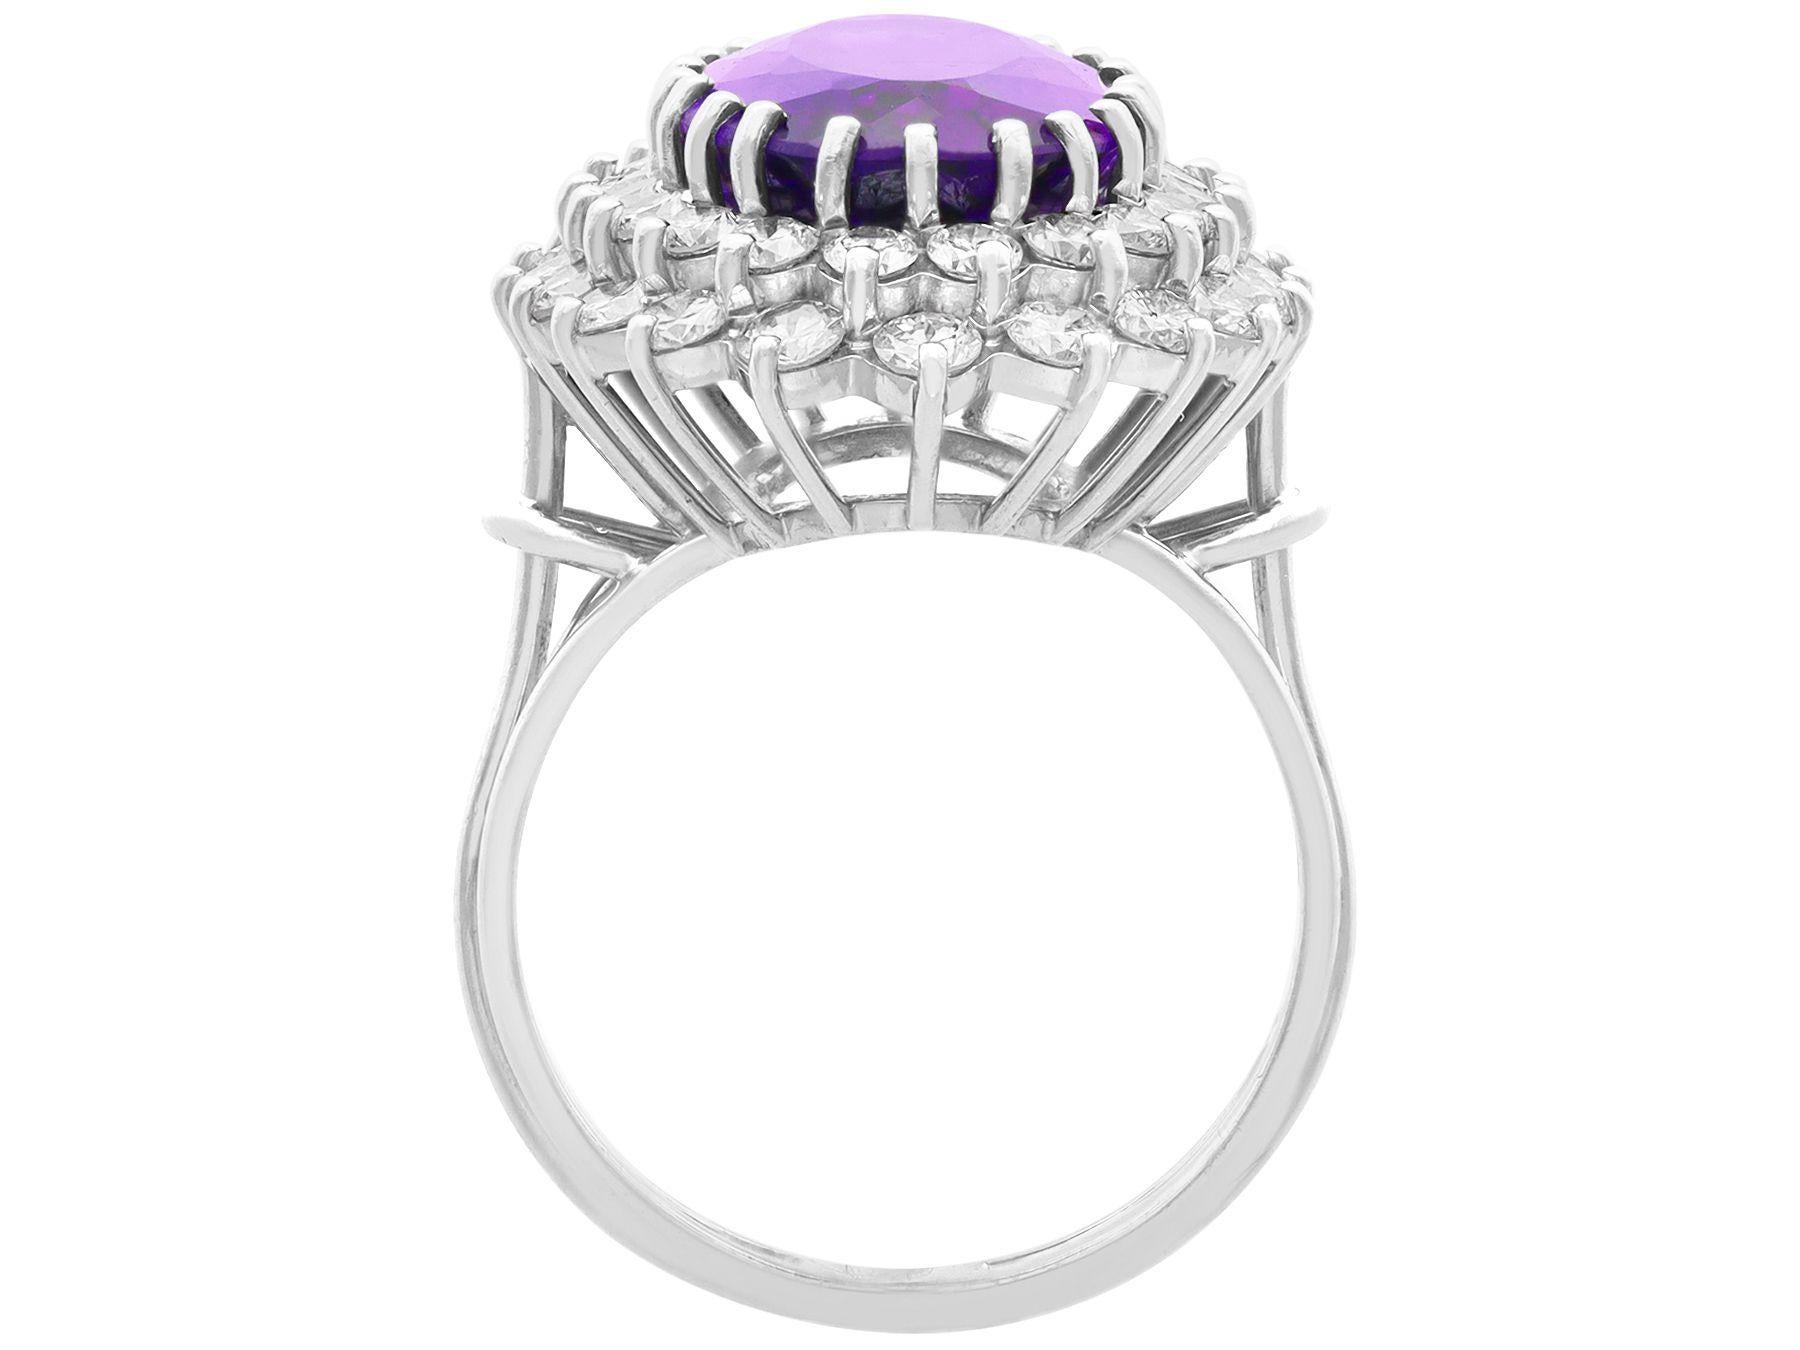 Vintage 8.36 Carat Amethyst and 2.26 Carat Diamond White Gold Cocktail Ring In Excellent Condition For Sale In Jesmond, Newcastle Upon Tyne